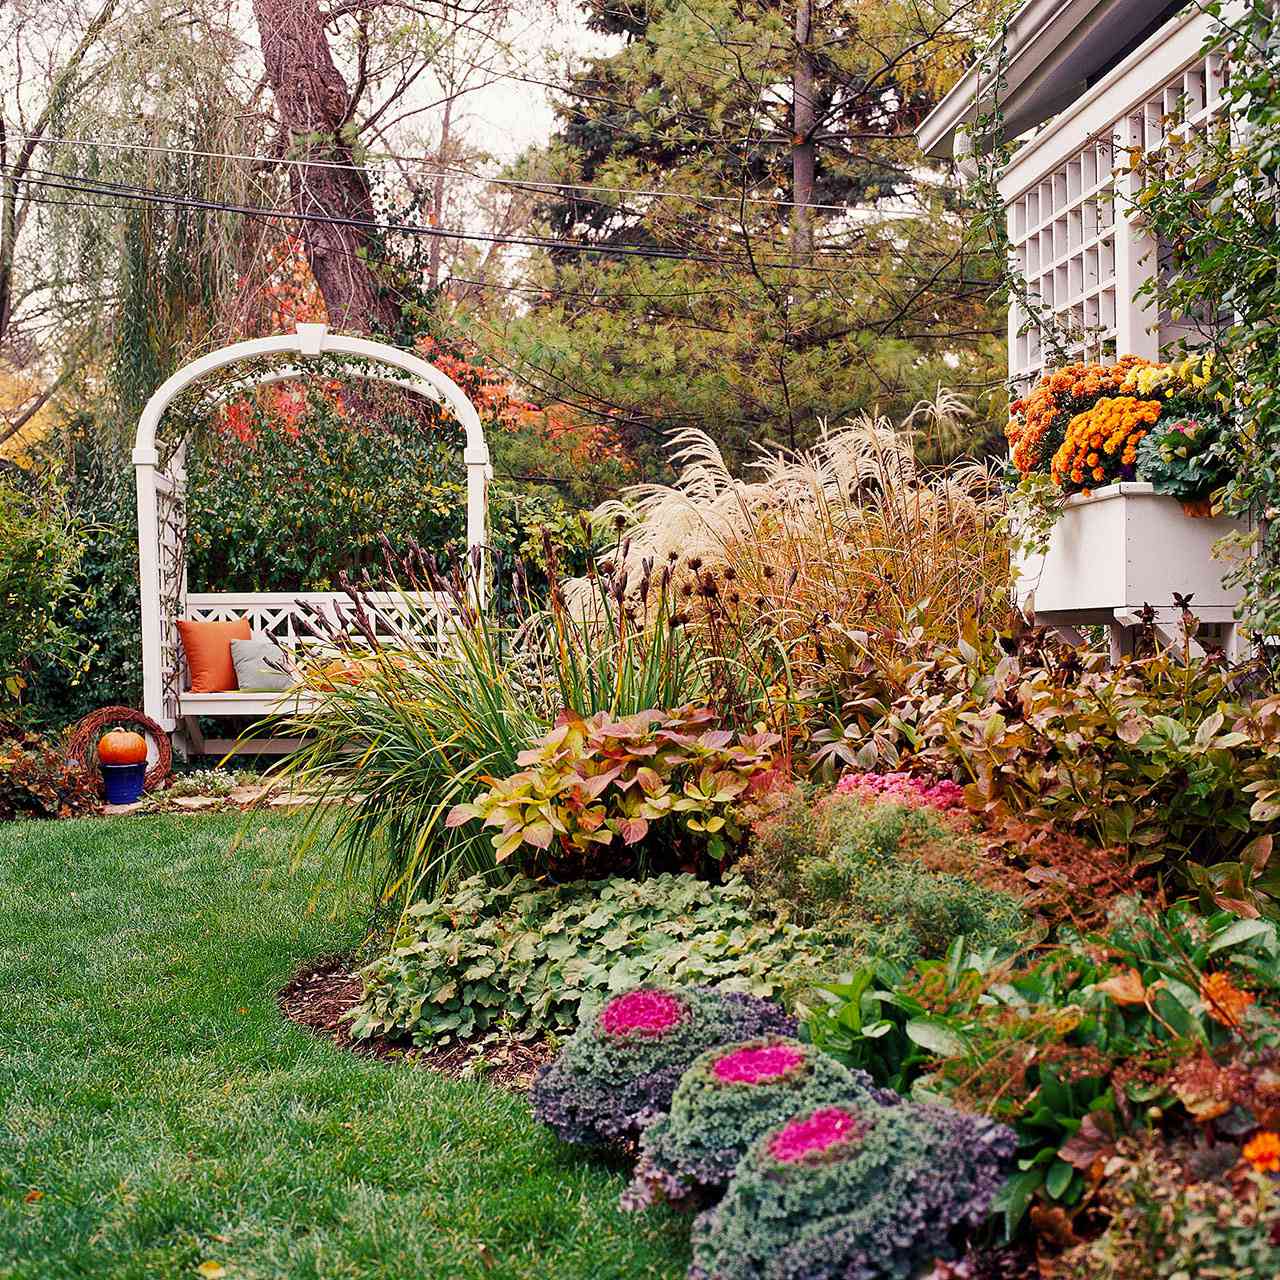  Simple Solutions For Small Space Landscapes Better Homes Gardens